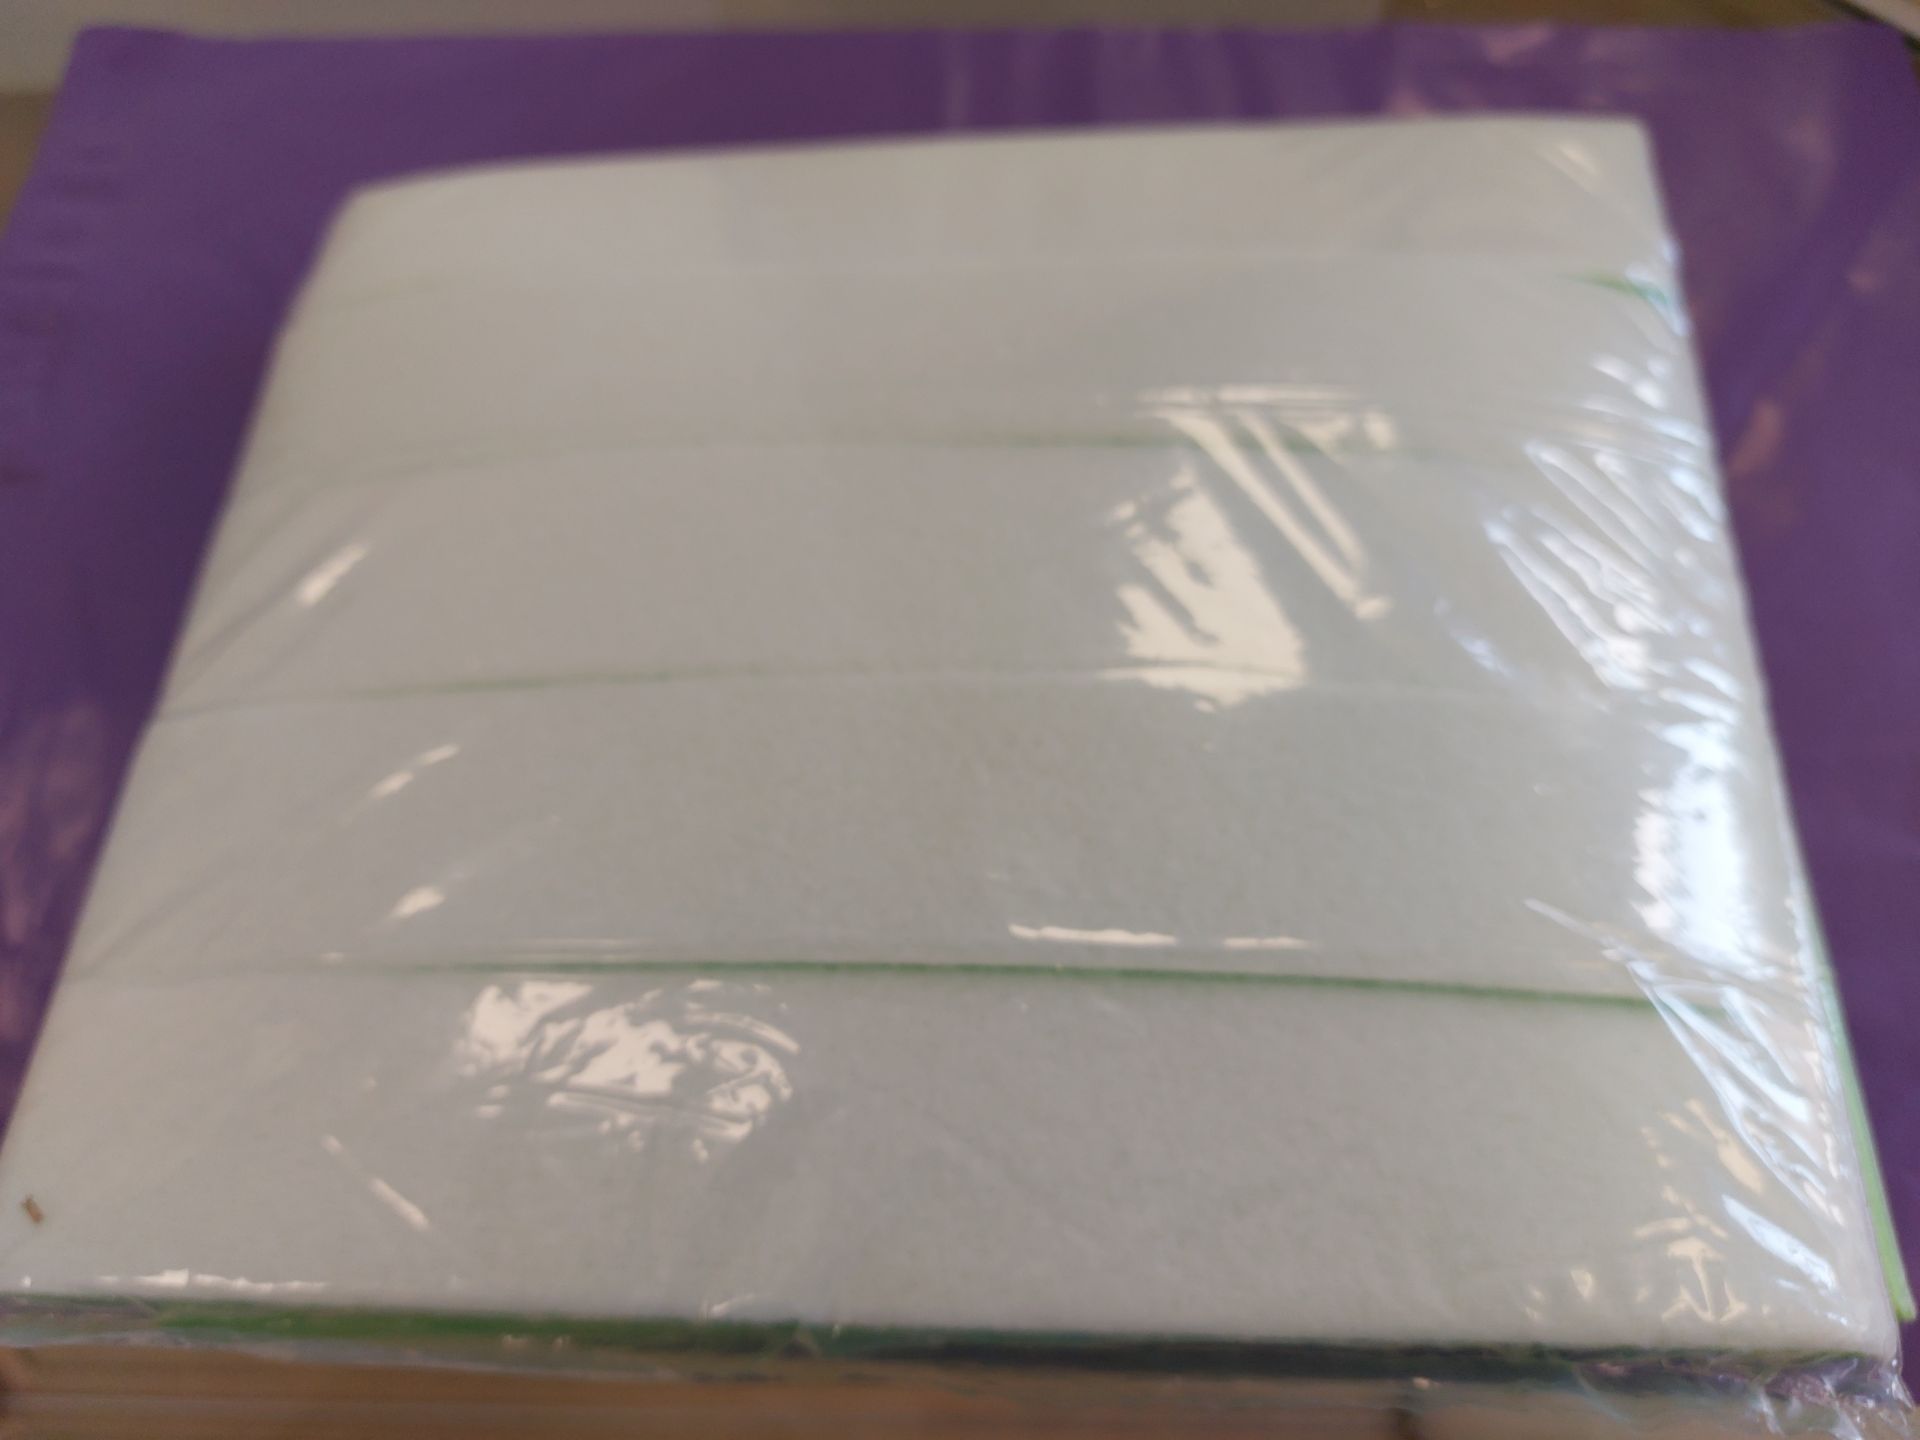 Green and Cream Foam Refills For Window Cleaning Tool, 5 Boxes of 50 - Image 2 of 2